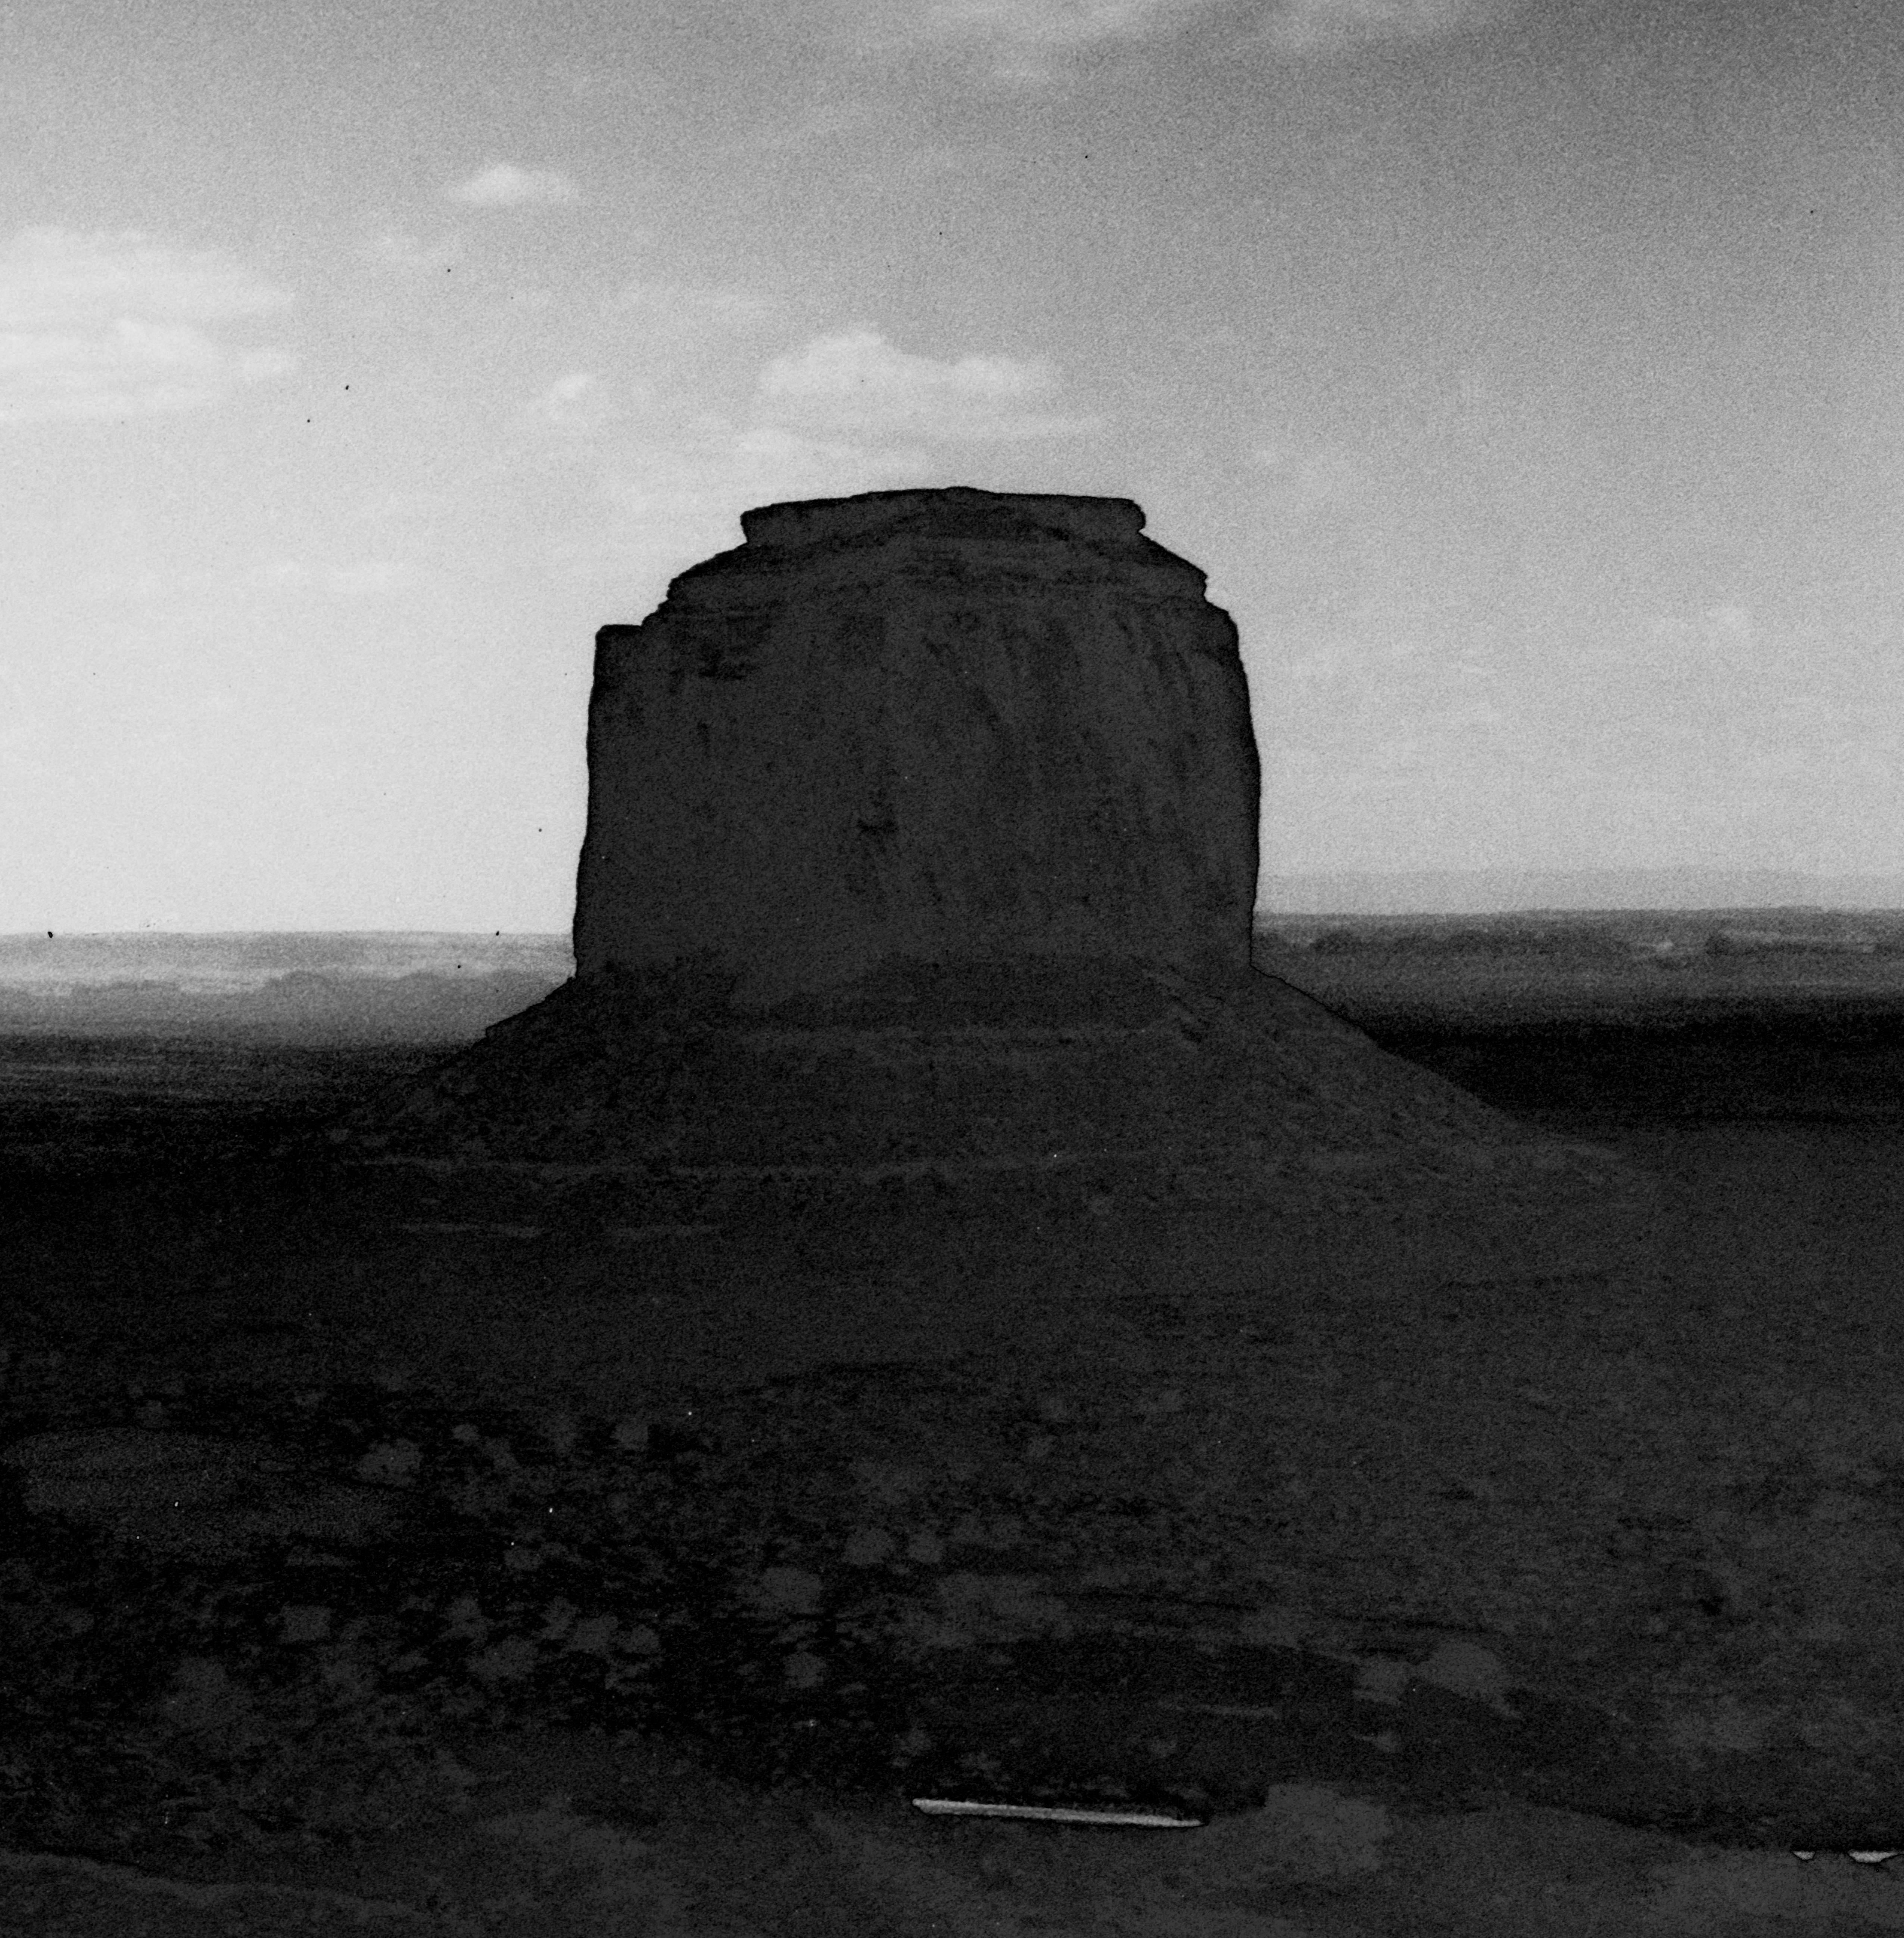 'Monument Valley' 

Arizona, USA, 2023

From Limited edition of 20.

Photograph shot using mid-century large format film camera Linhof.

Printed on archival Hahnemühle Photo Rag Baryta paper. Signed both front and back with Certificate of